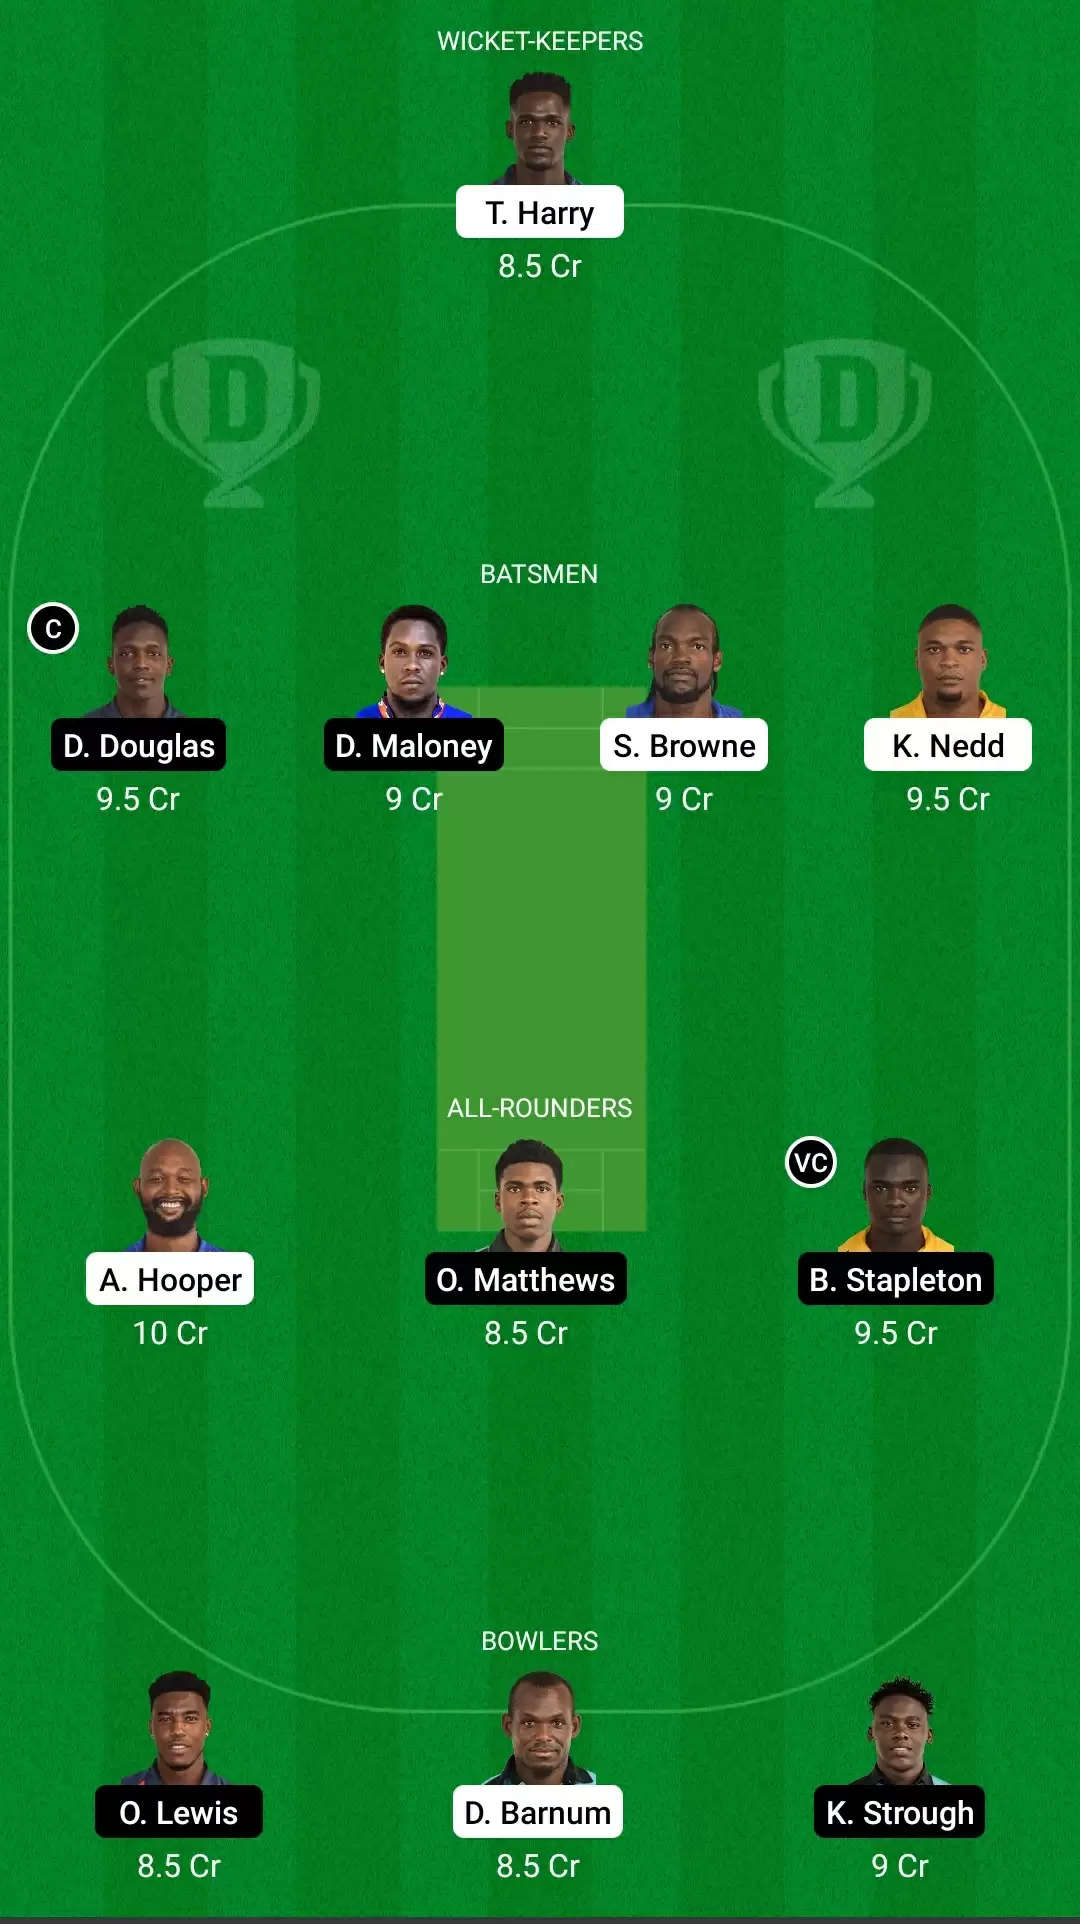 Vincy Premier League 2021, Match 16: GRD vs LSH Dream11 Prediction, Fantasy Cricket Tips, Team, Playing 11, Pitch Report, Weather Conditions and Injury Update